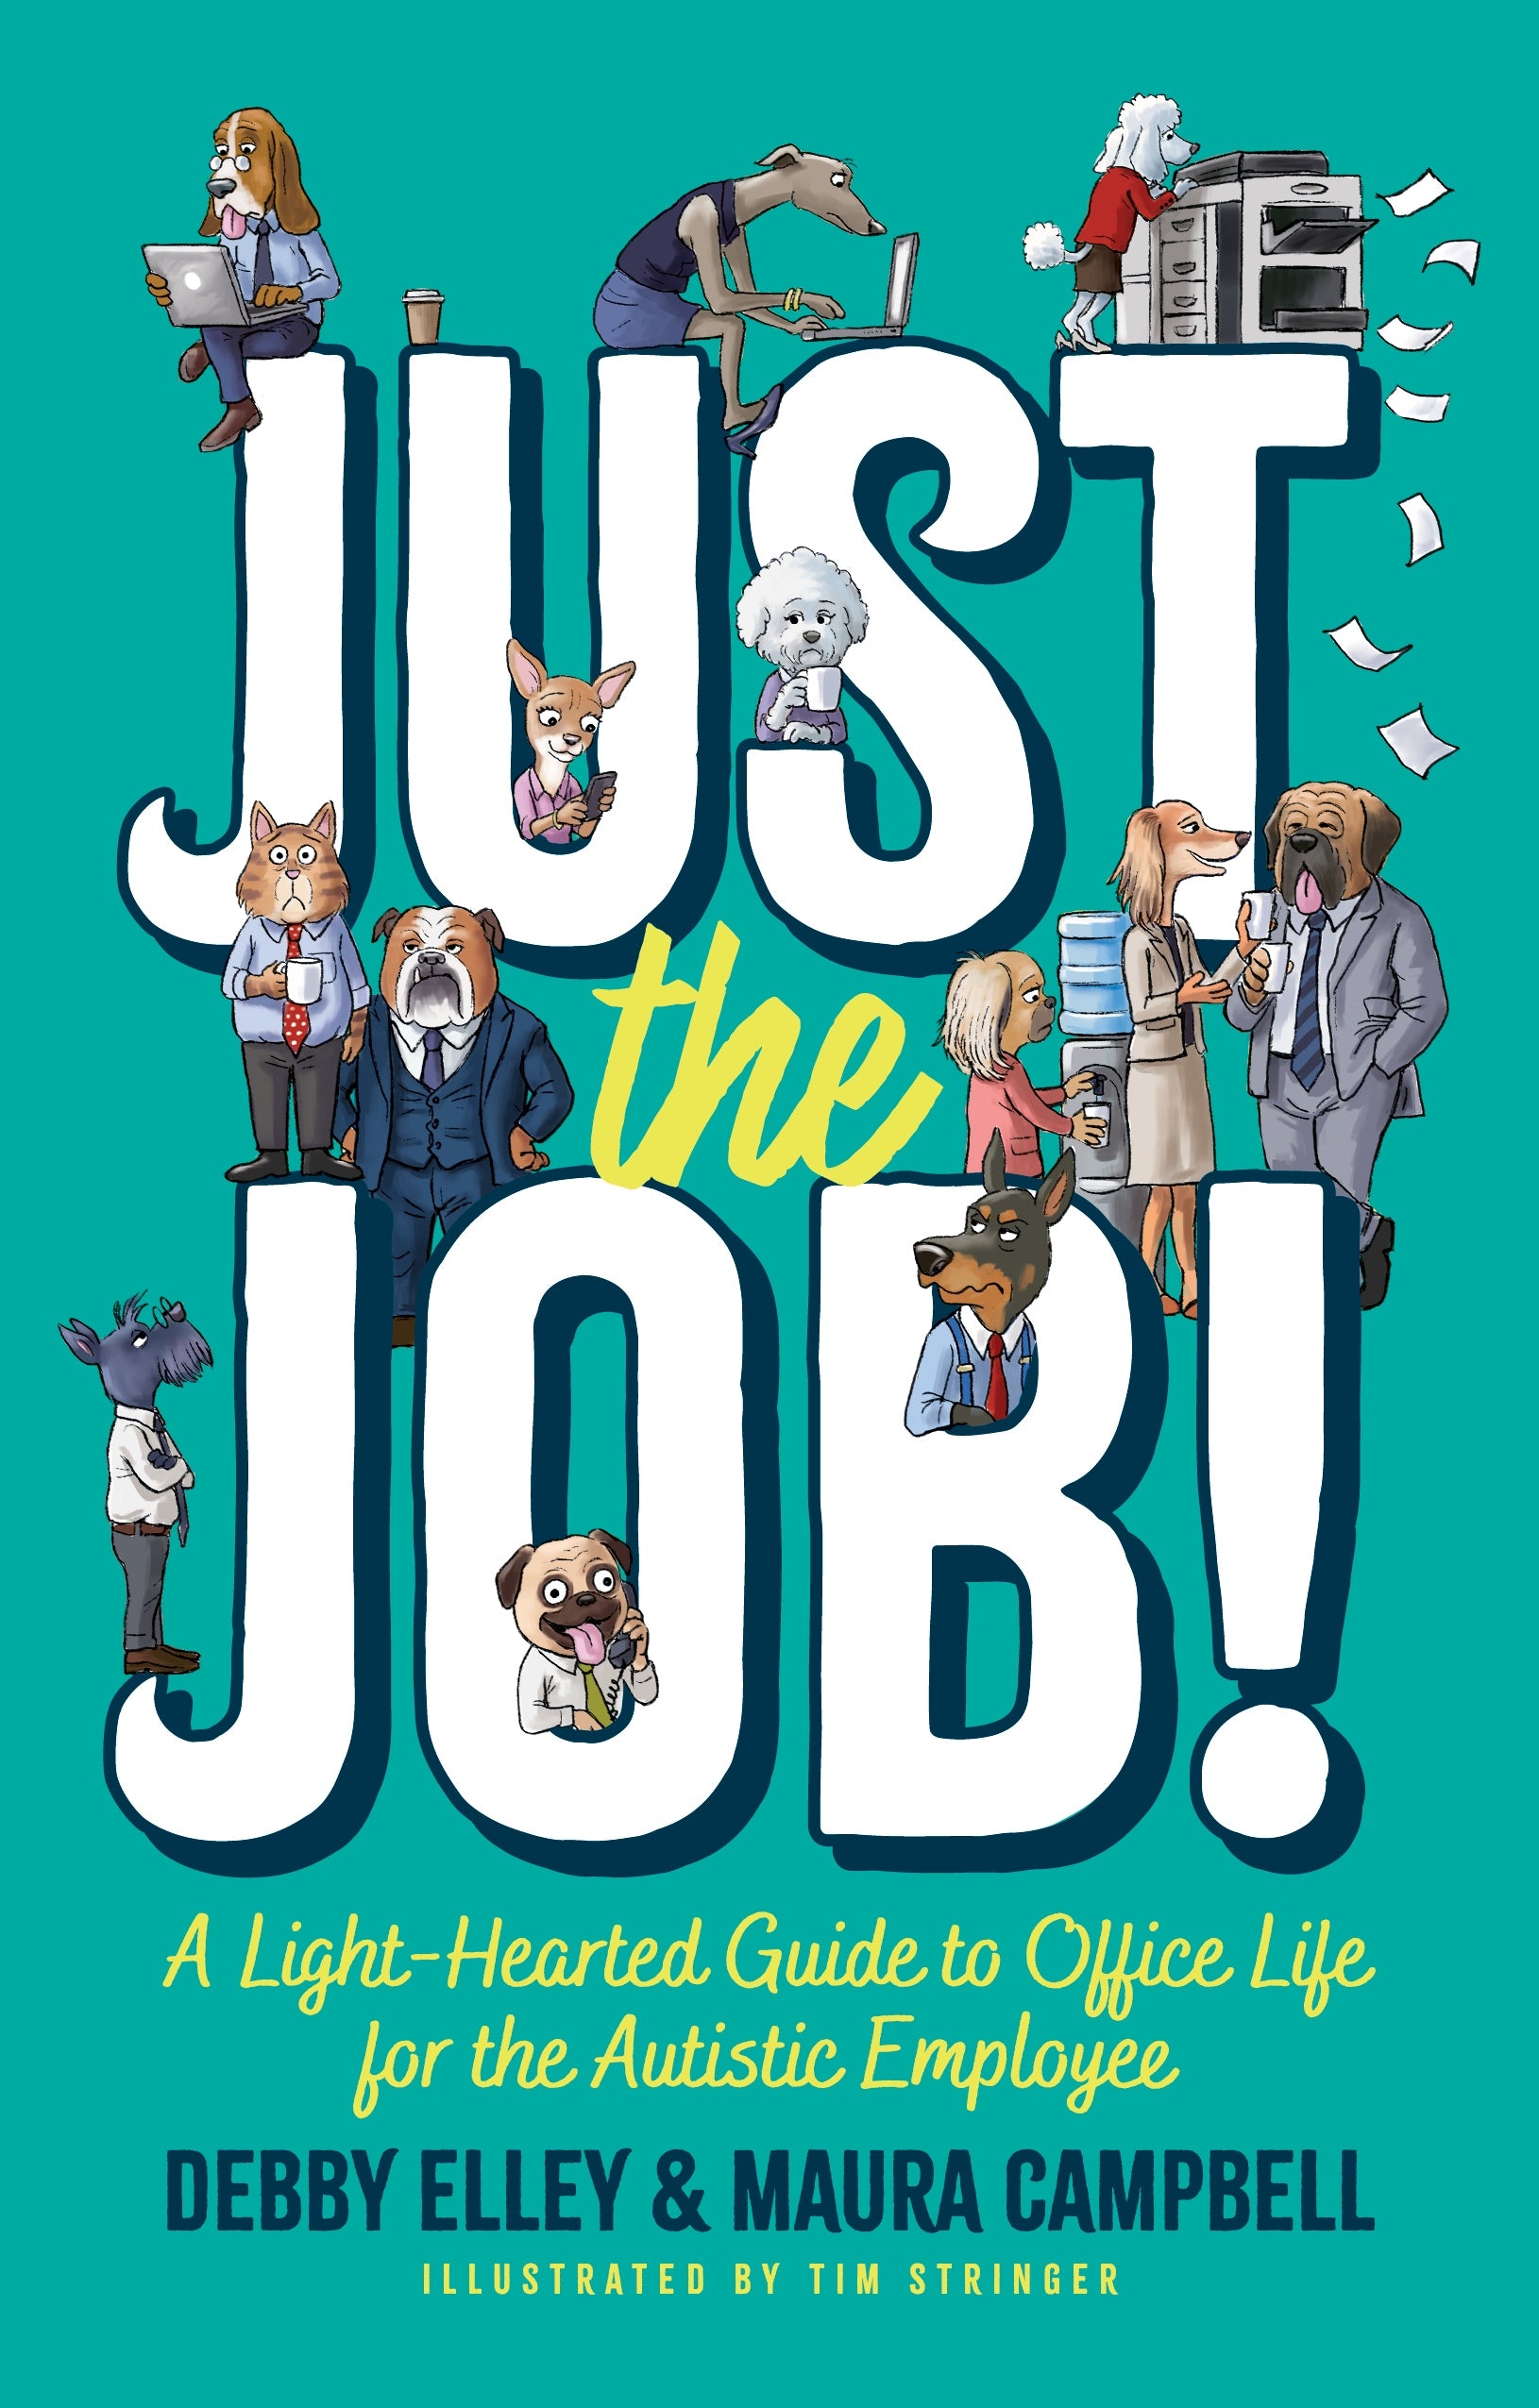 Just the Job! by Tim Stringer, Maura Campbell, Debby Elley